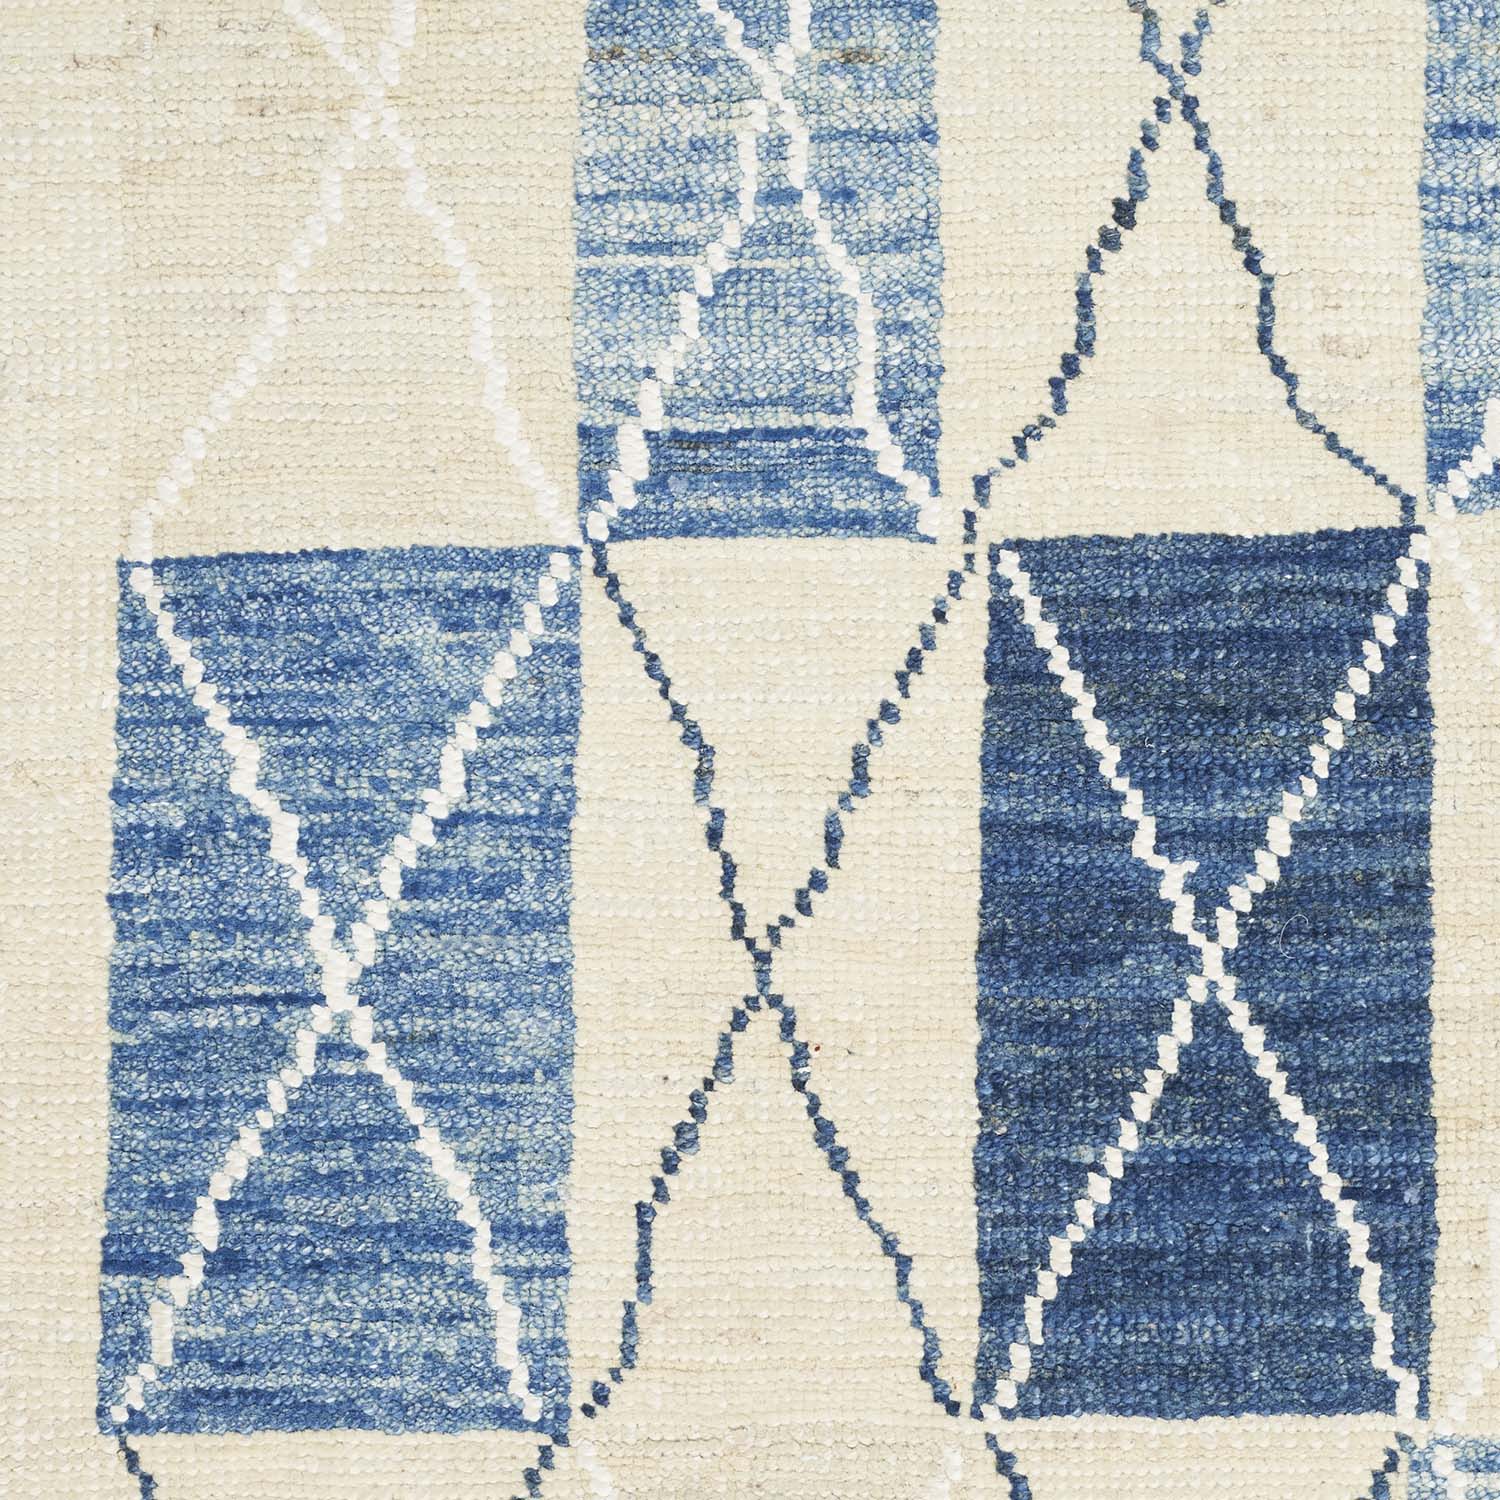 Textured blue fabric with geometric pattern adds depth and dimension.